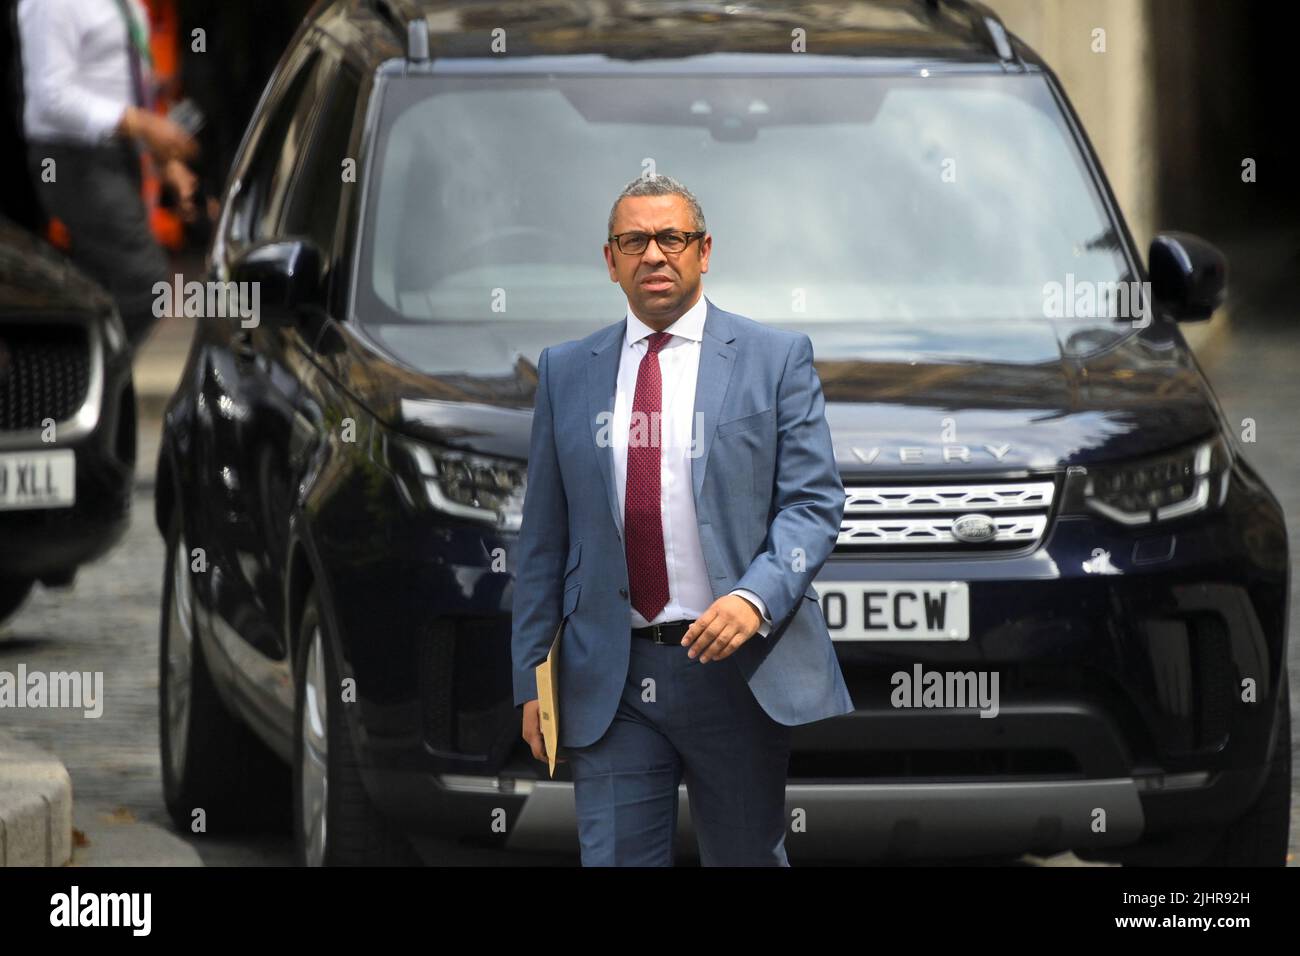 British Education Secretary James Cleverly enters a car between buildings in the houses of Parliament, in London, Britain, July 20, 2022. REUTERS/Toby Melville Stock Photo